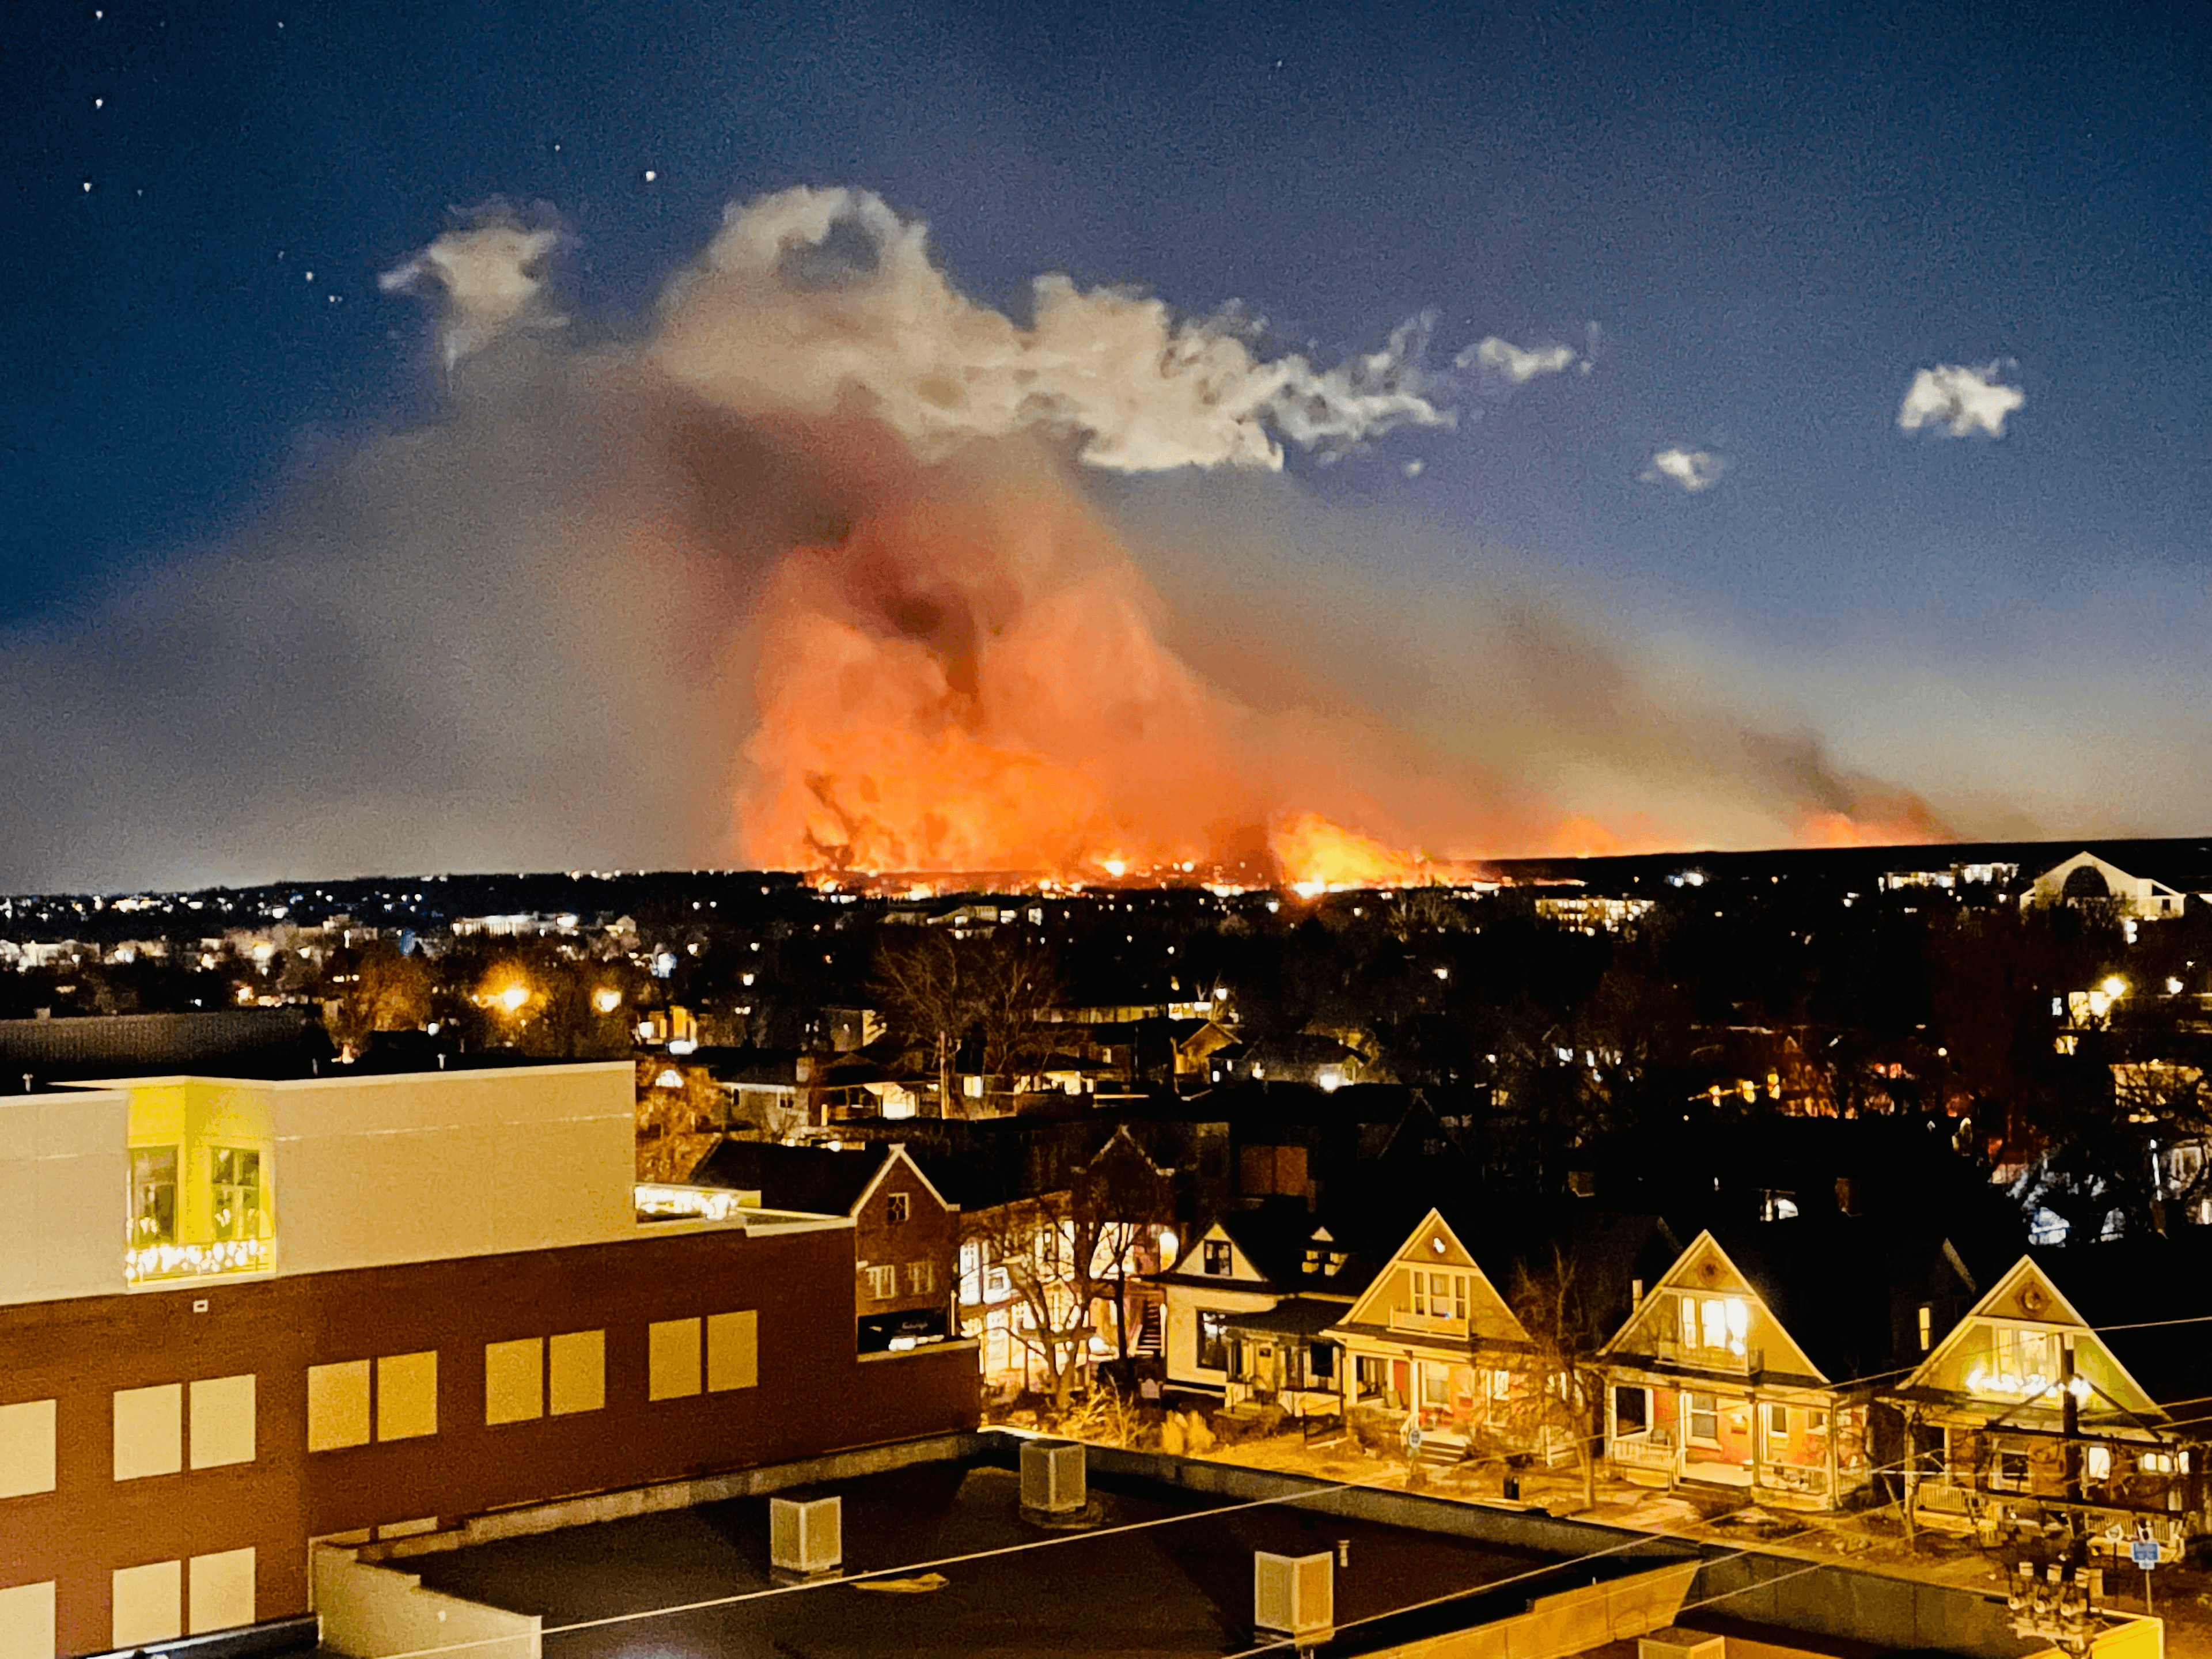 Fire displayed in the distance of cityscape